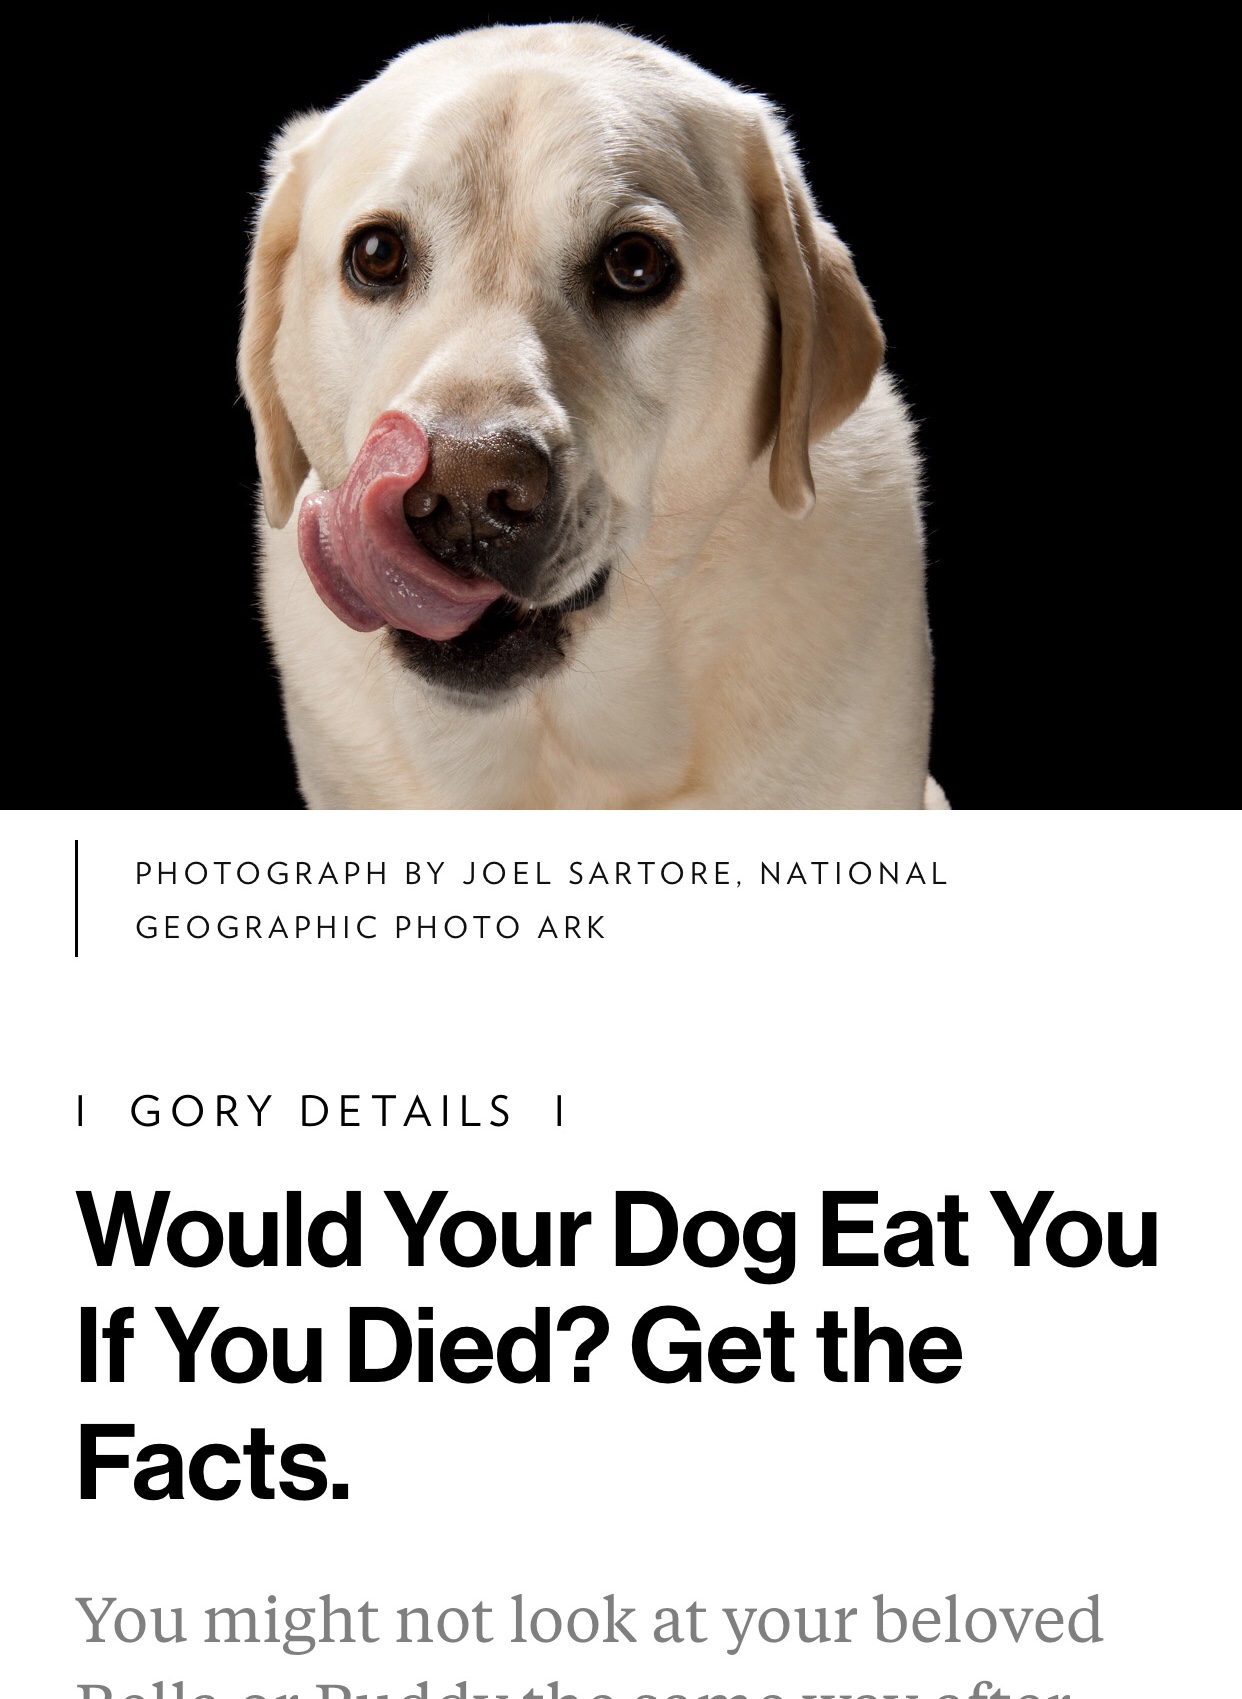 dank meme would your dog eat you - Photograph By Joel Sartore, National Geographic Photo Ark | Gory Details || Would Your Dog Eat You If You Died? Get the Facts. You might not look at your beloved